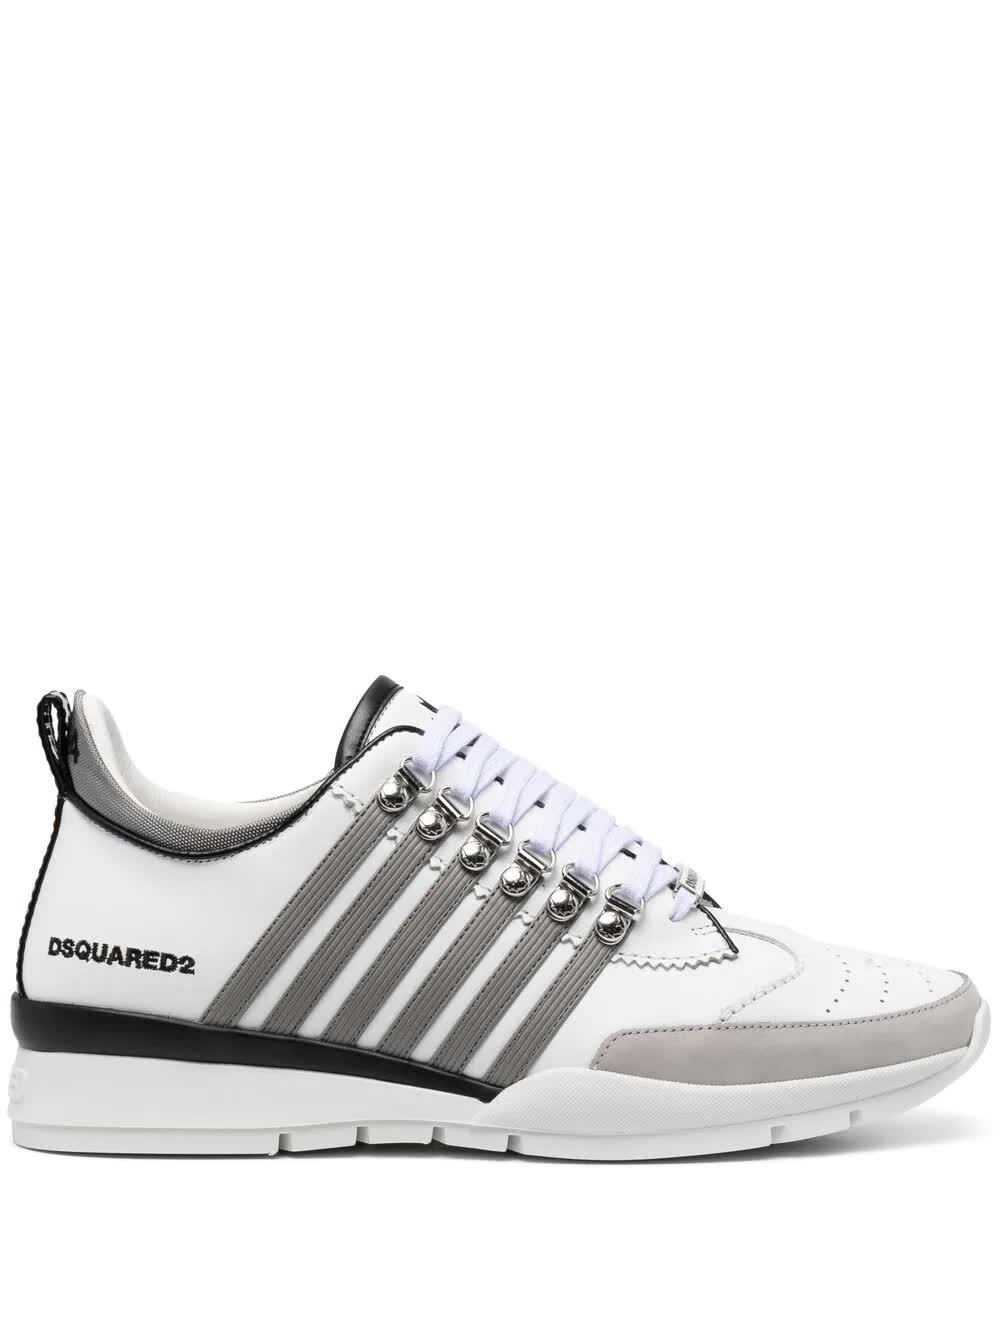 Dsquared2 Man White And Grey 251 Sneakers